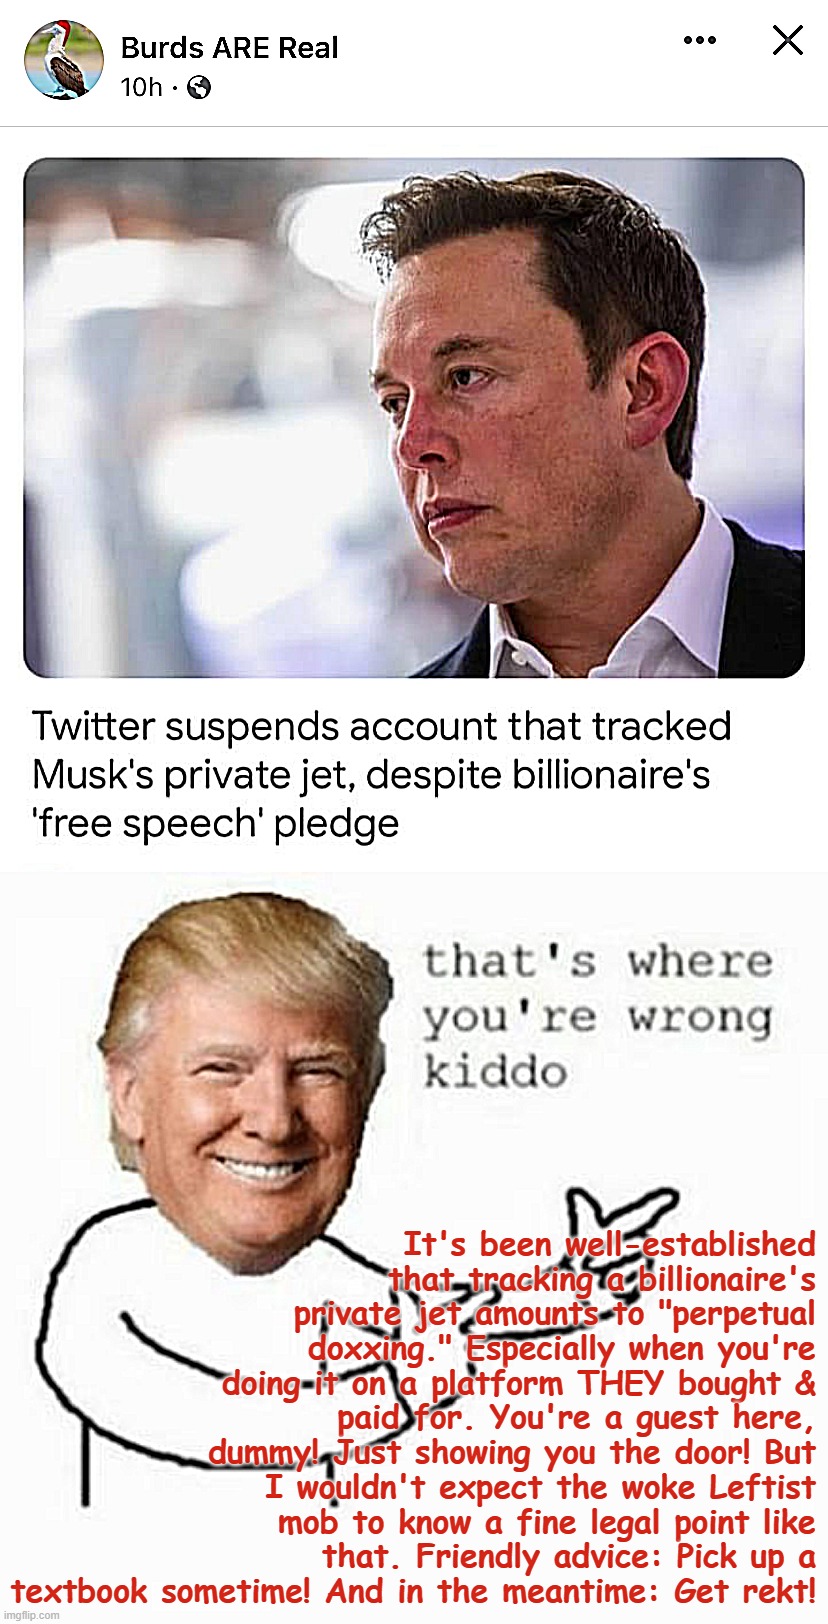 Muskophobia | It's been well-established that tracking a billionaire's private jet amounts to "perpetual doxxing." Especially when you're doing it on a platform THEY bought & paid for. You're a guest here, dummy! Just showing you the door! But I wouldn't expect the woke Leftist mob to know a fine legal point like that. Friendly advice: Pick up a textbook sometime! And in the meantime: Get rekt! | image tagged in elon musk twitter hypocrite,that's where you're wrong,elon musk,elon musk buying twitter | made w/ Imgflip meme maker